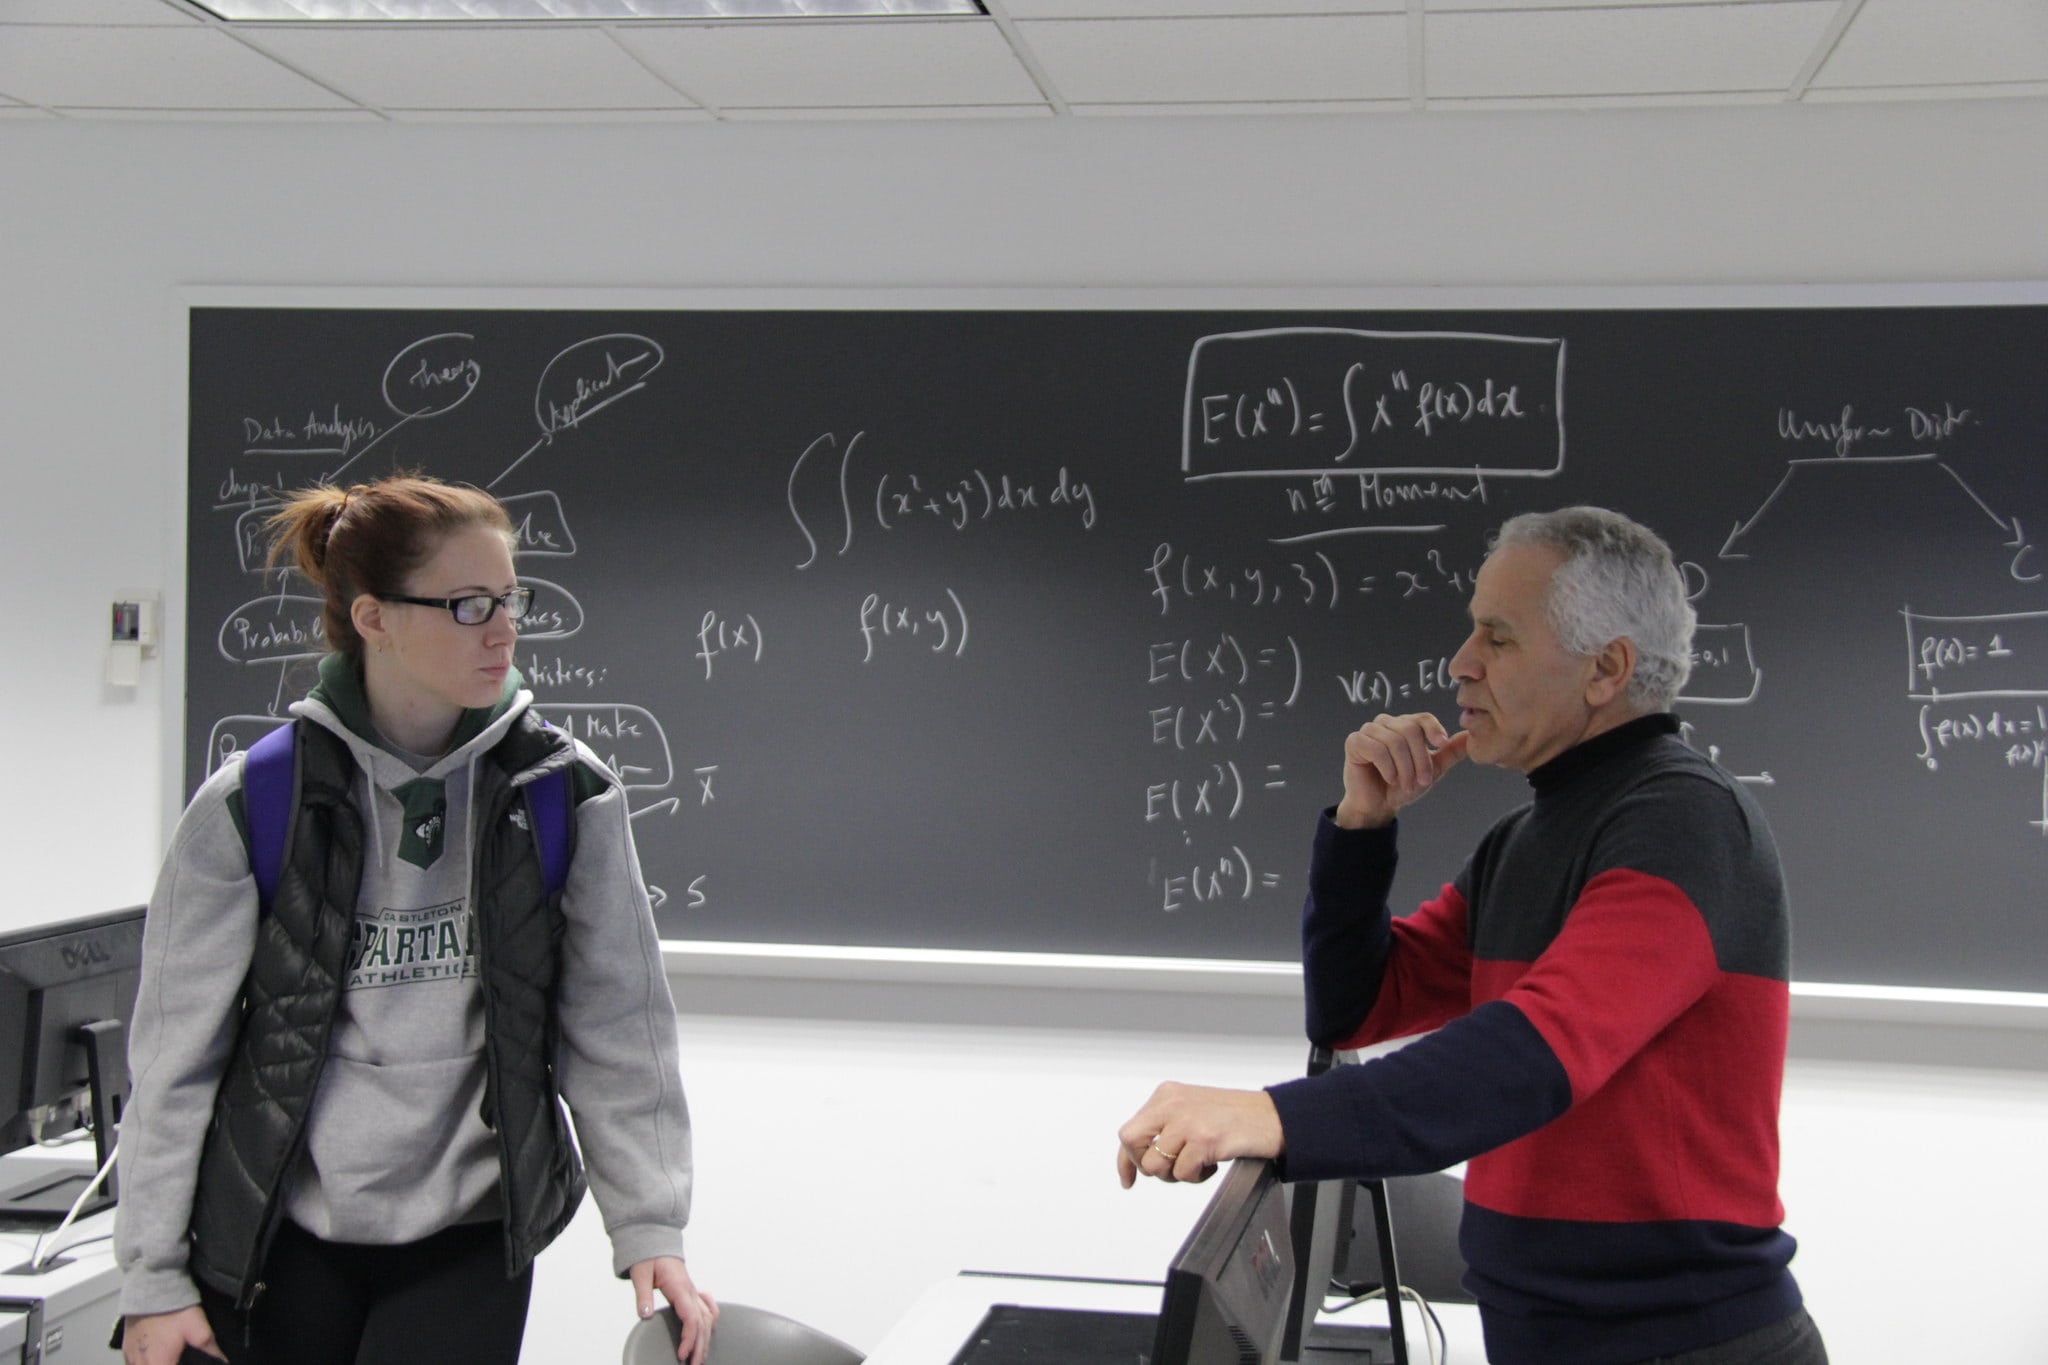 Two individuals standing in front of a blackboard in conversation at Vermont State University.